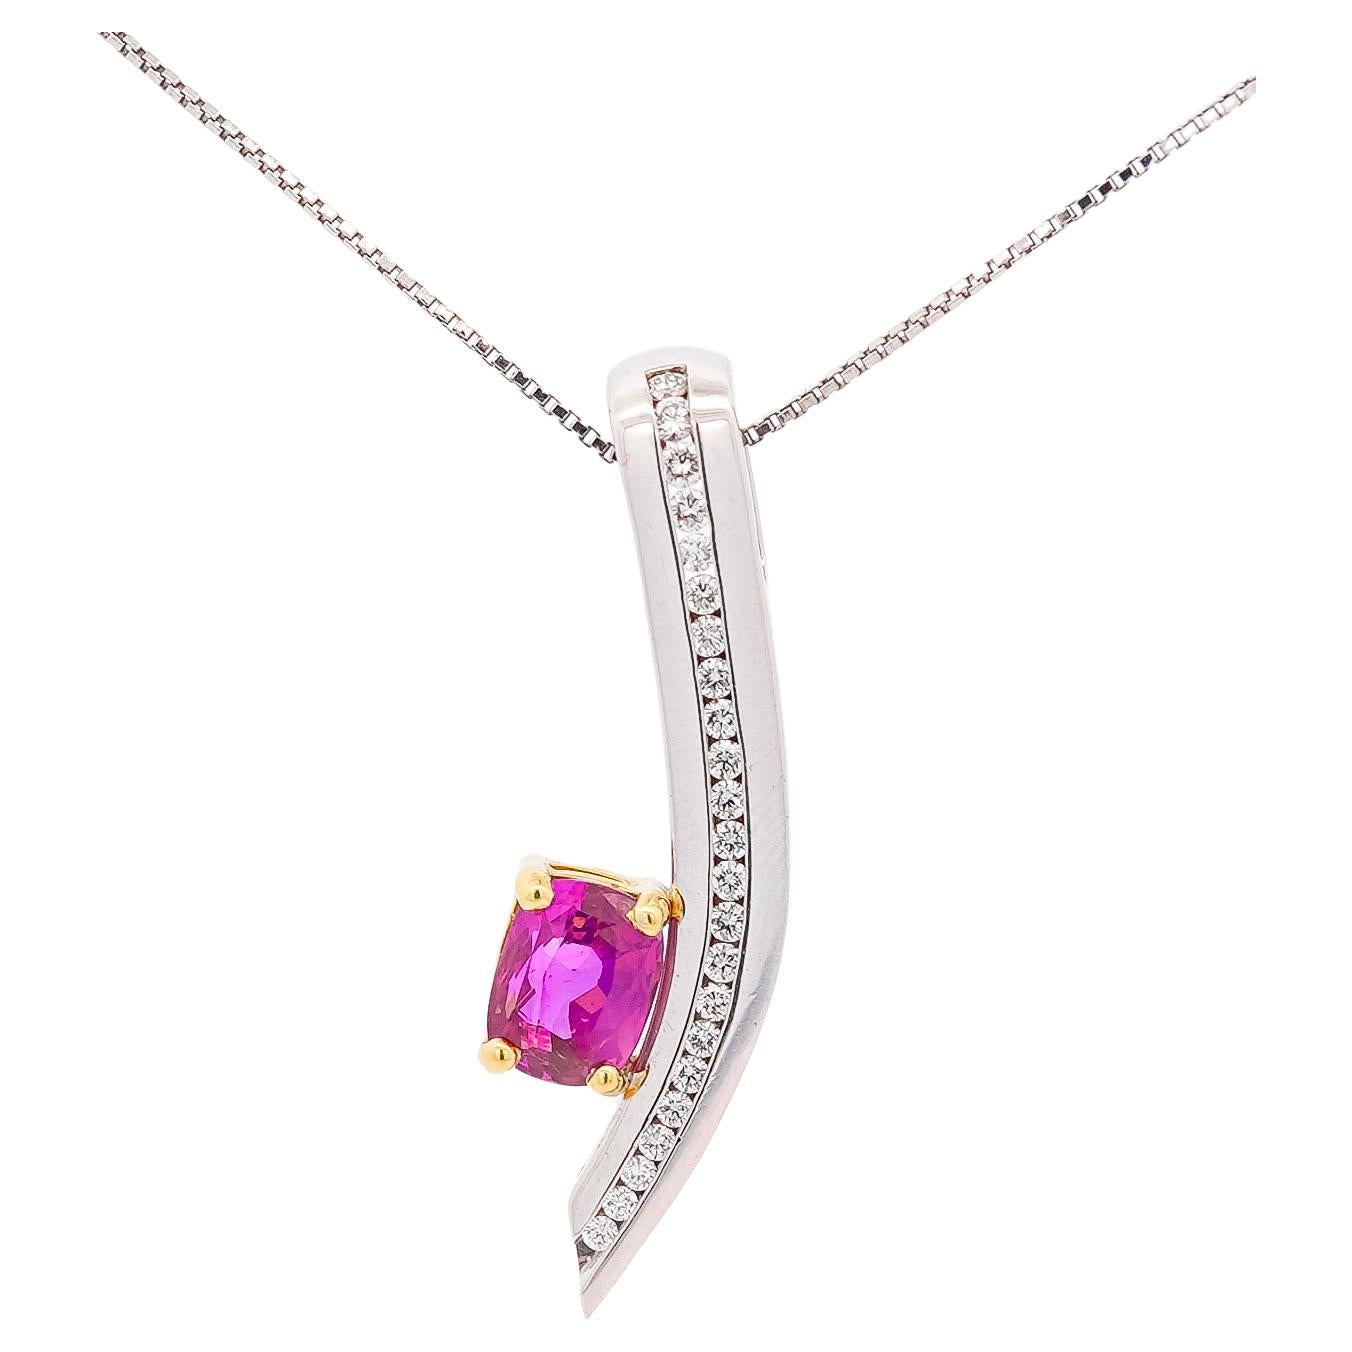  2.50 Carat GIA Certified Cushion-Cut Pink Sapphire and Diamond 18K Pendant For Sale